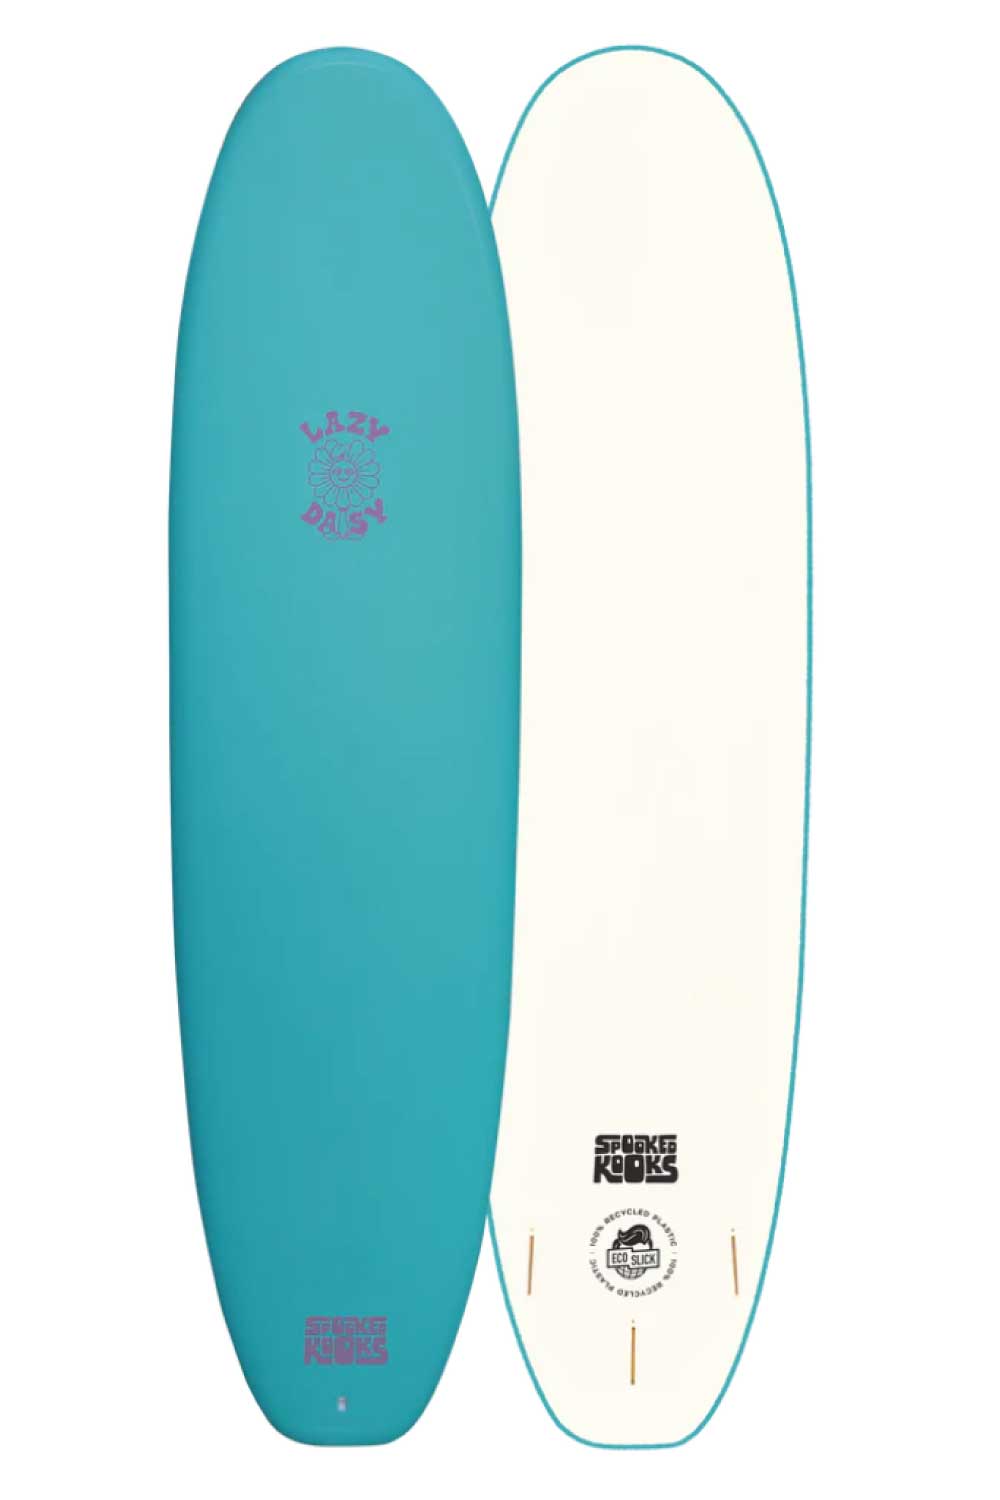 Spooked Kooks Lazy Daisy Softboard - Comes with Fins